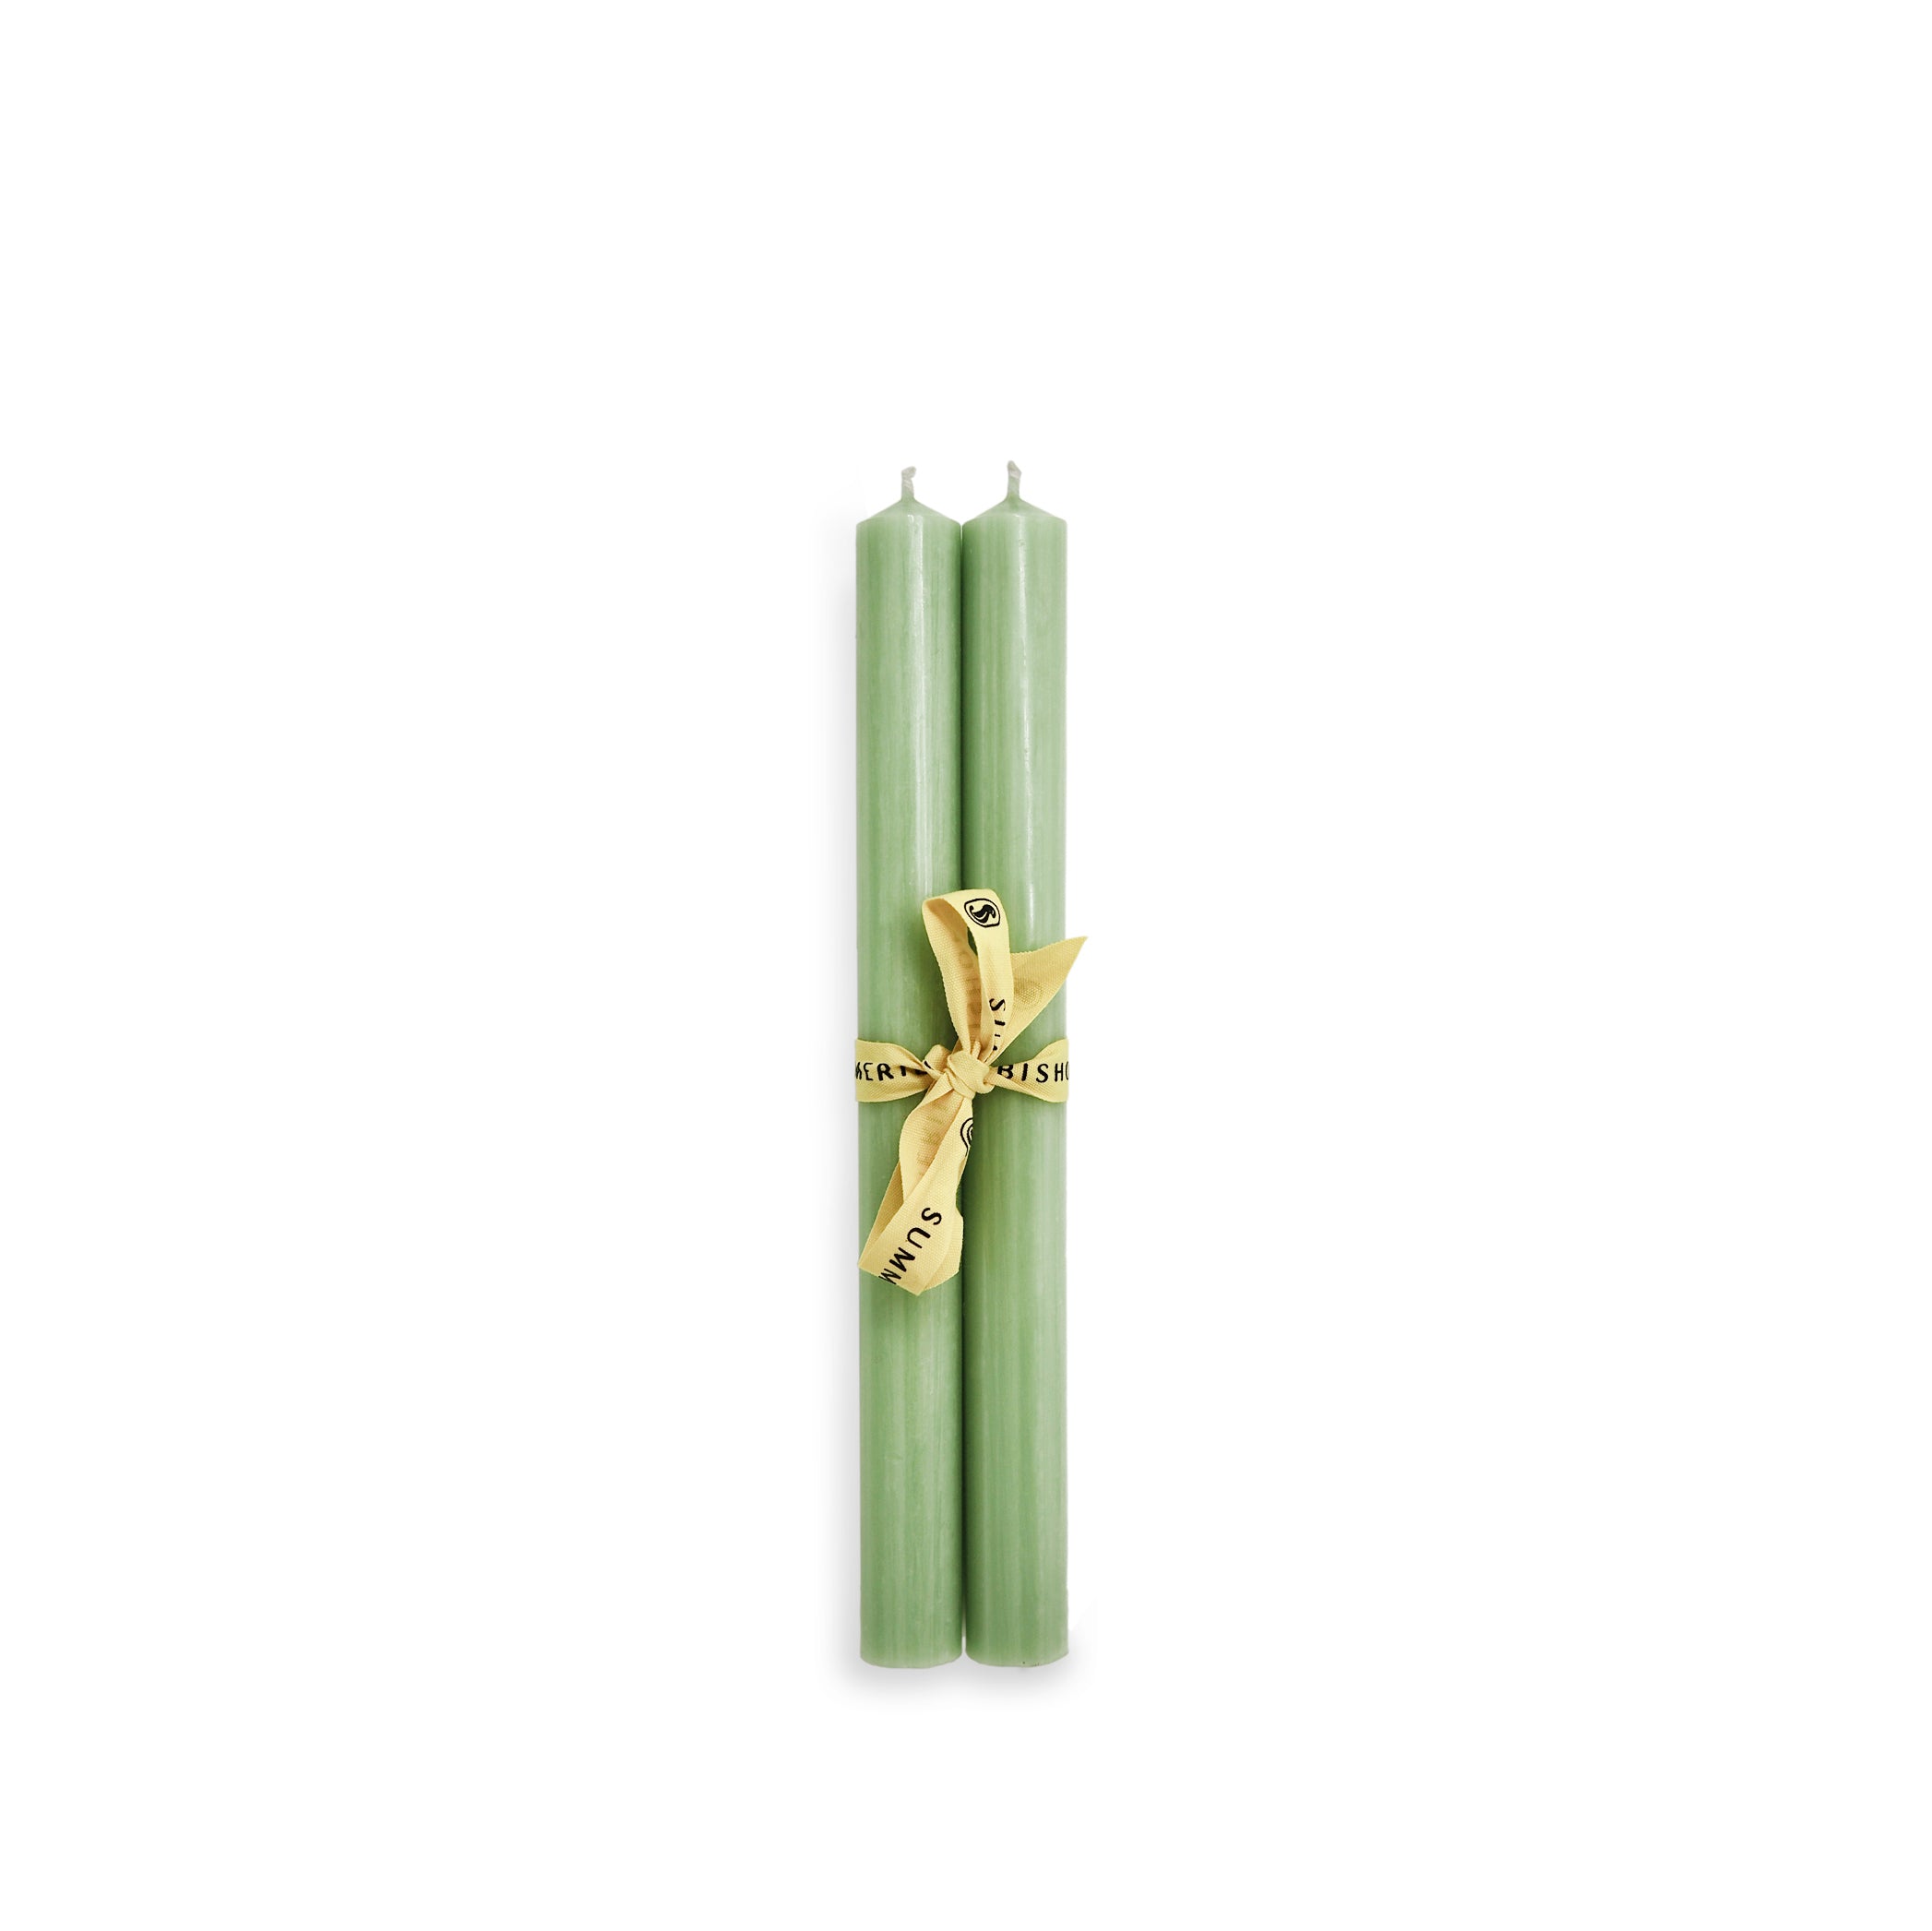 Pair of Coloured Church Candles in Atlantic Green